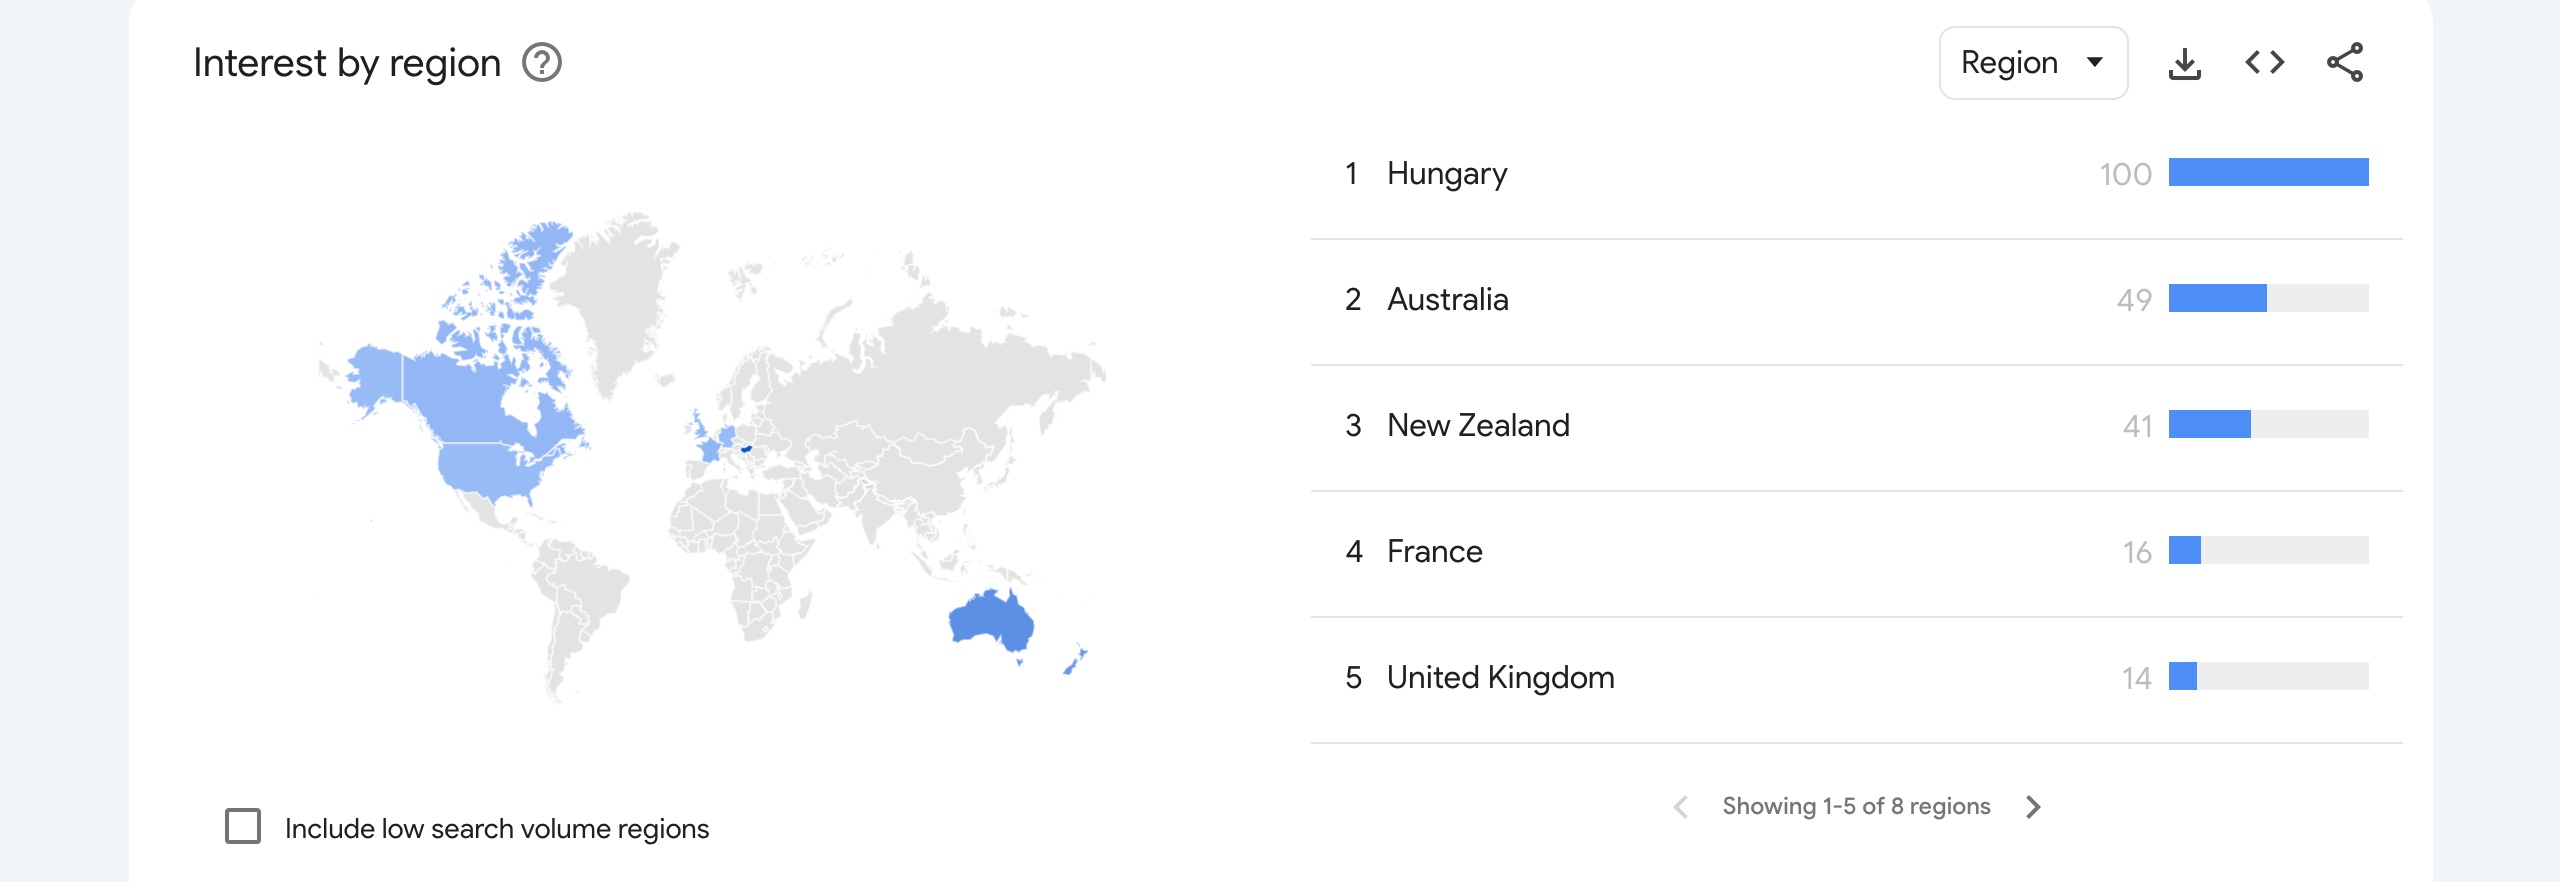 Google Trends screenshot showing most interest from Hungary, Australia and New Zealand